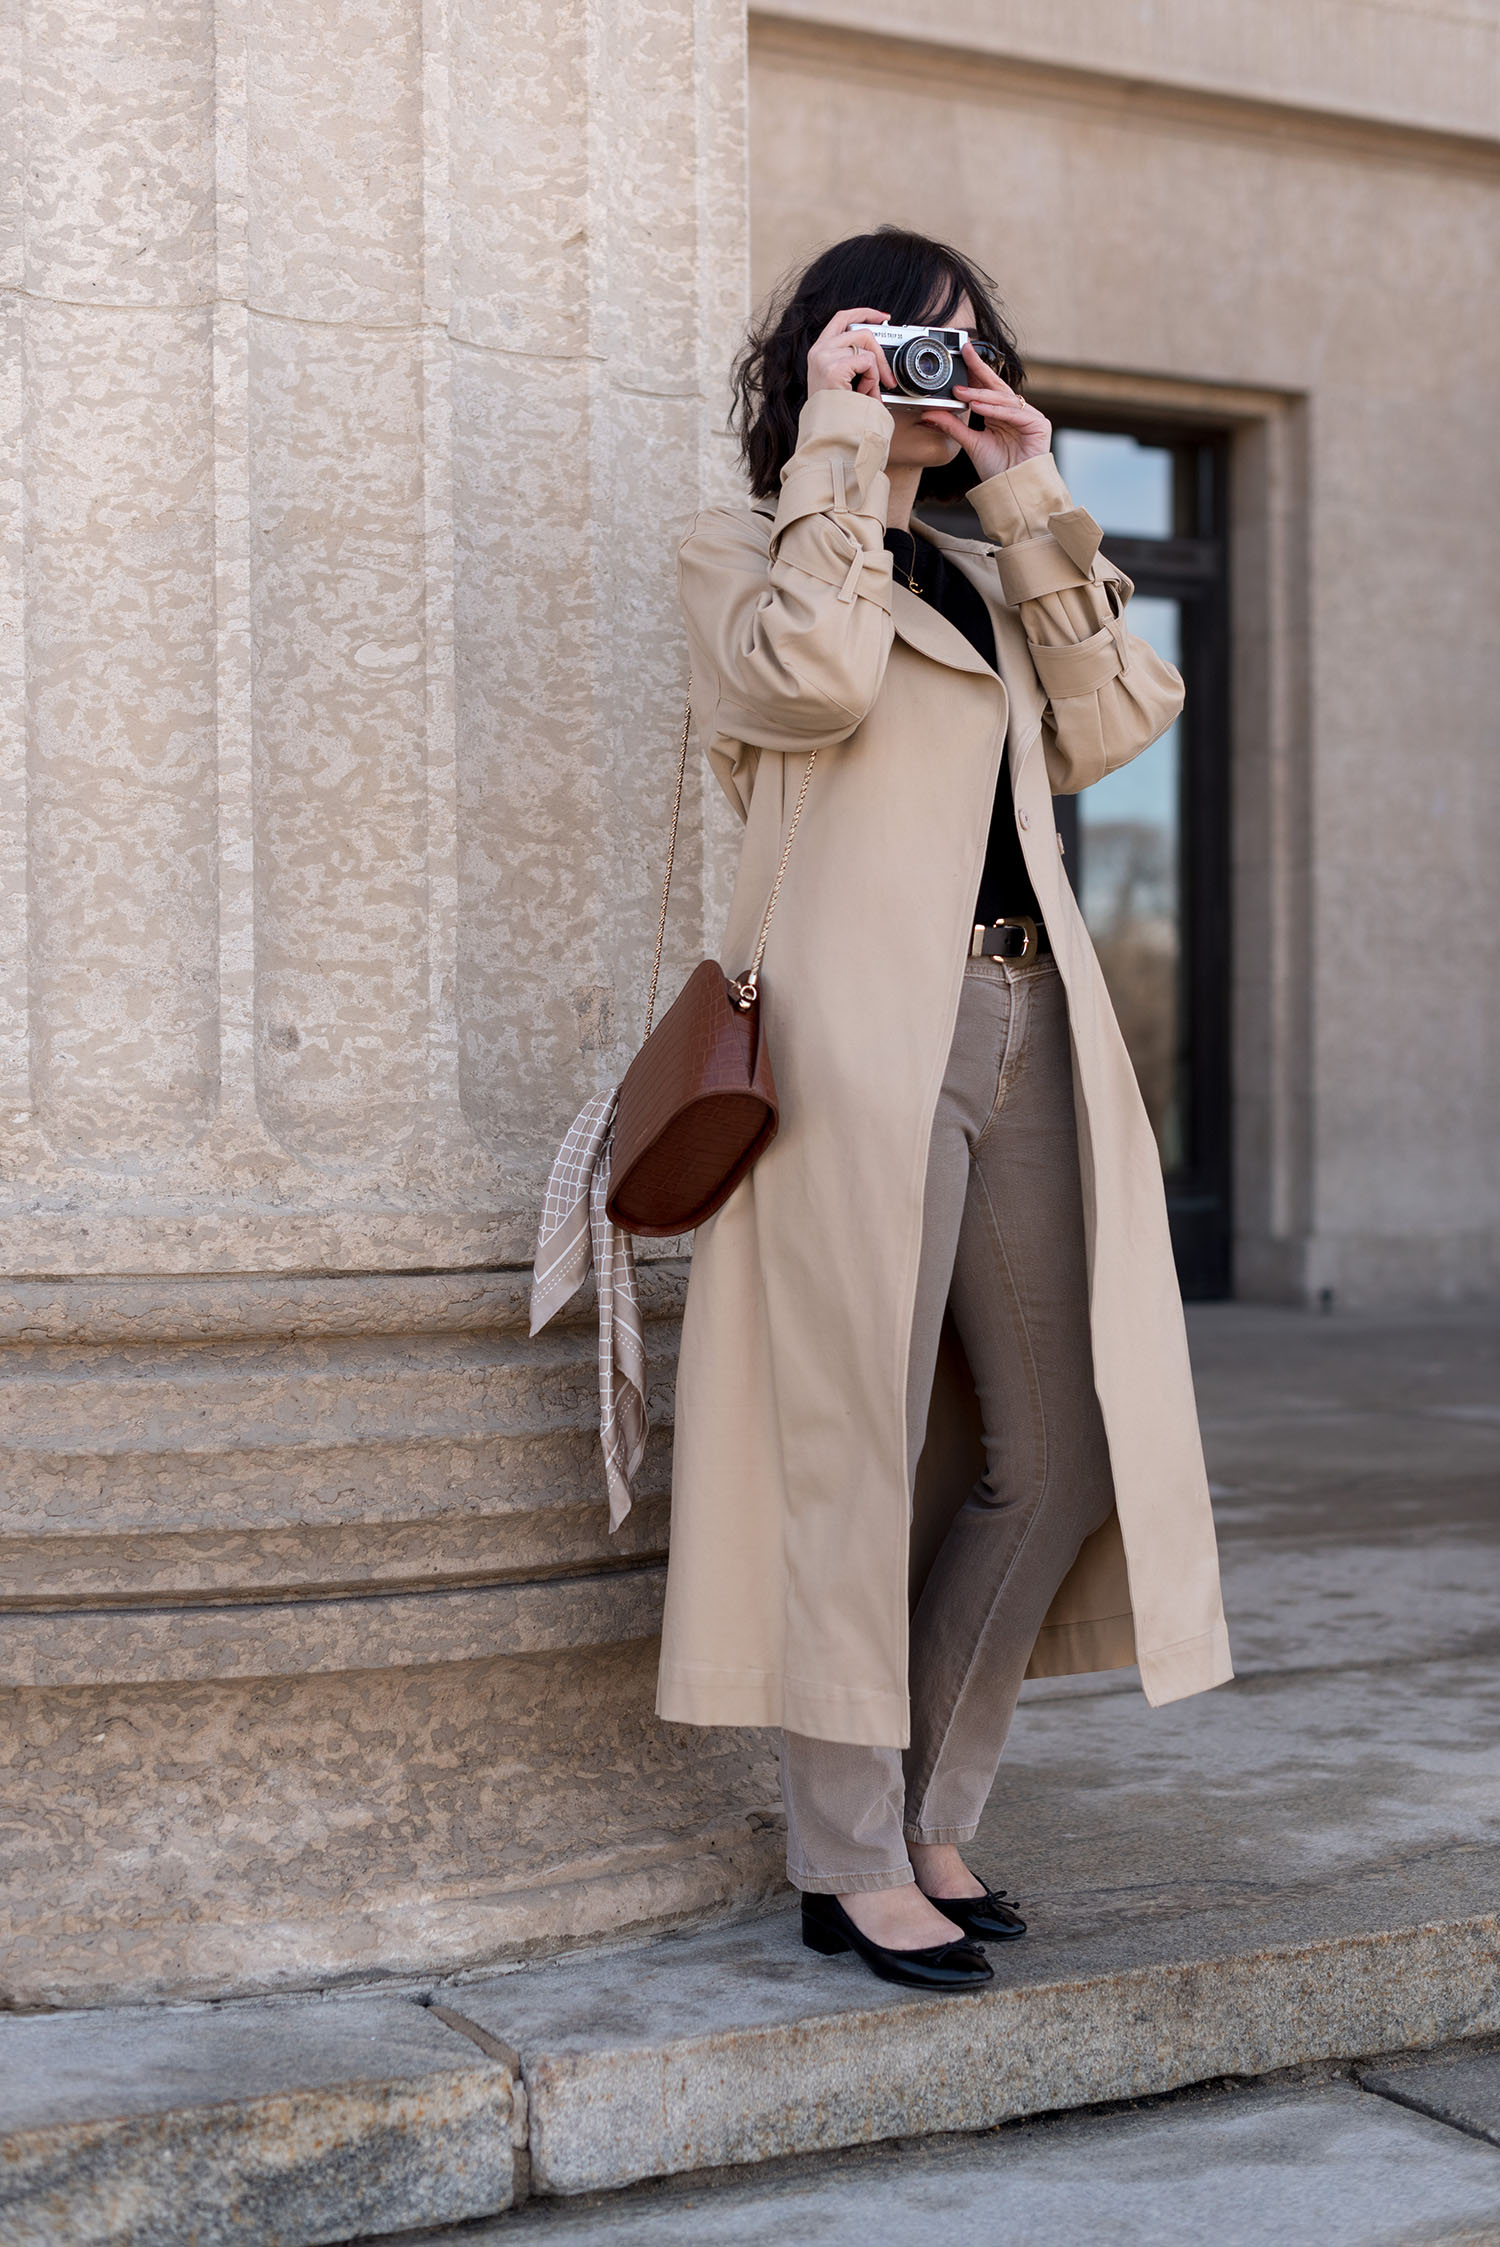 Top Winnipeg fashion blogger Cee Fardoe of Coco & Vera stands at the Manitoba Legislature wearing an H&M trench coat and carrying a Sezane handbag